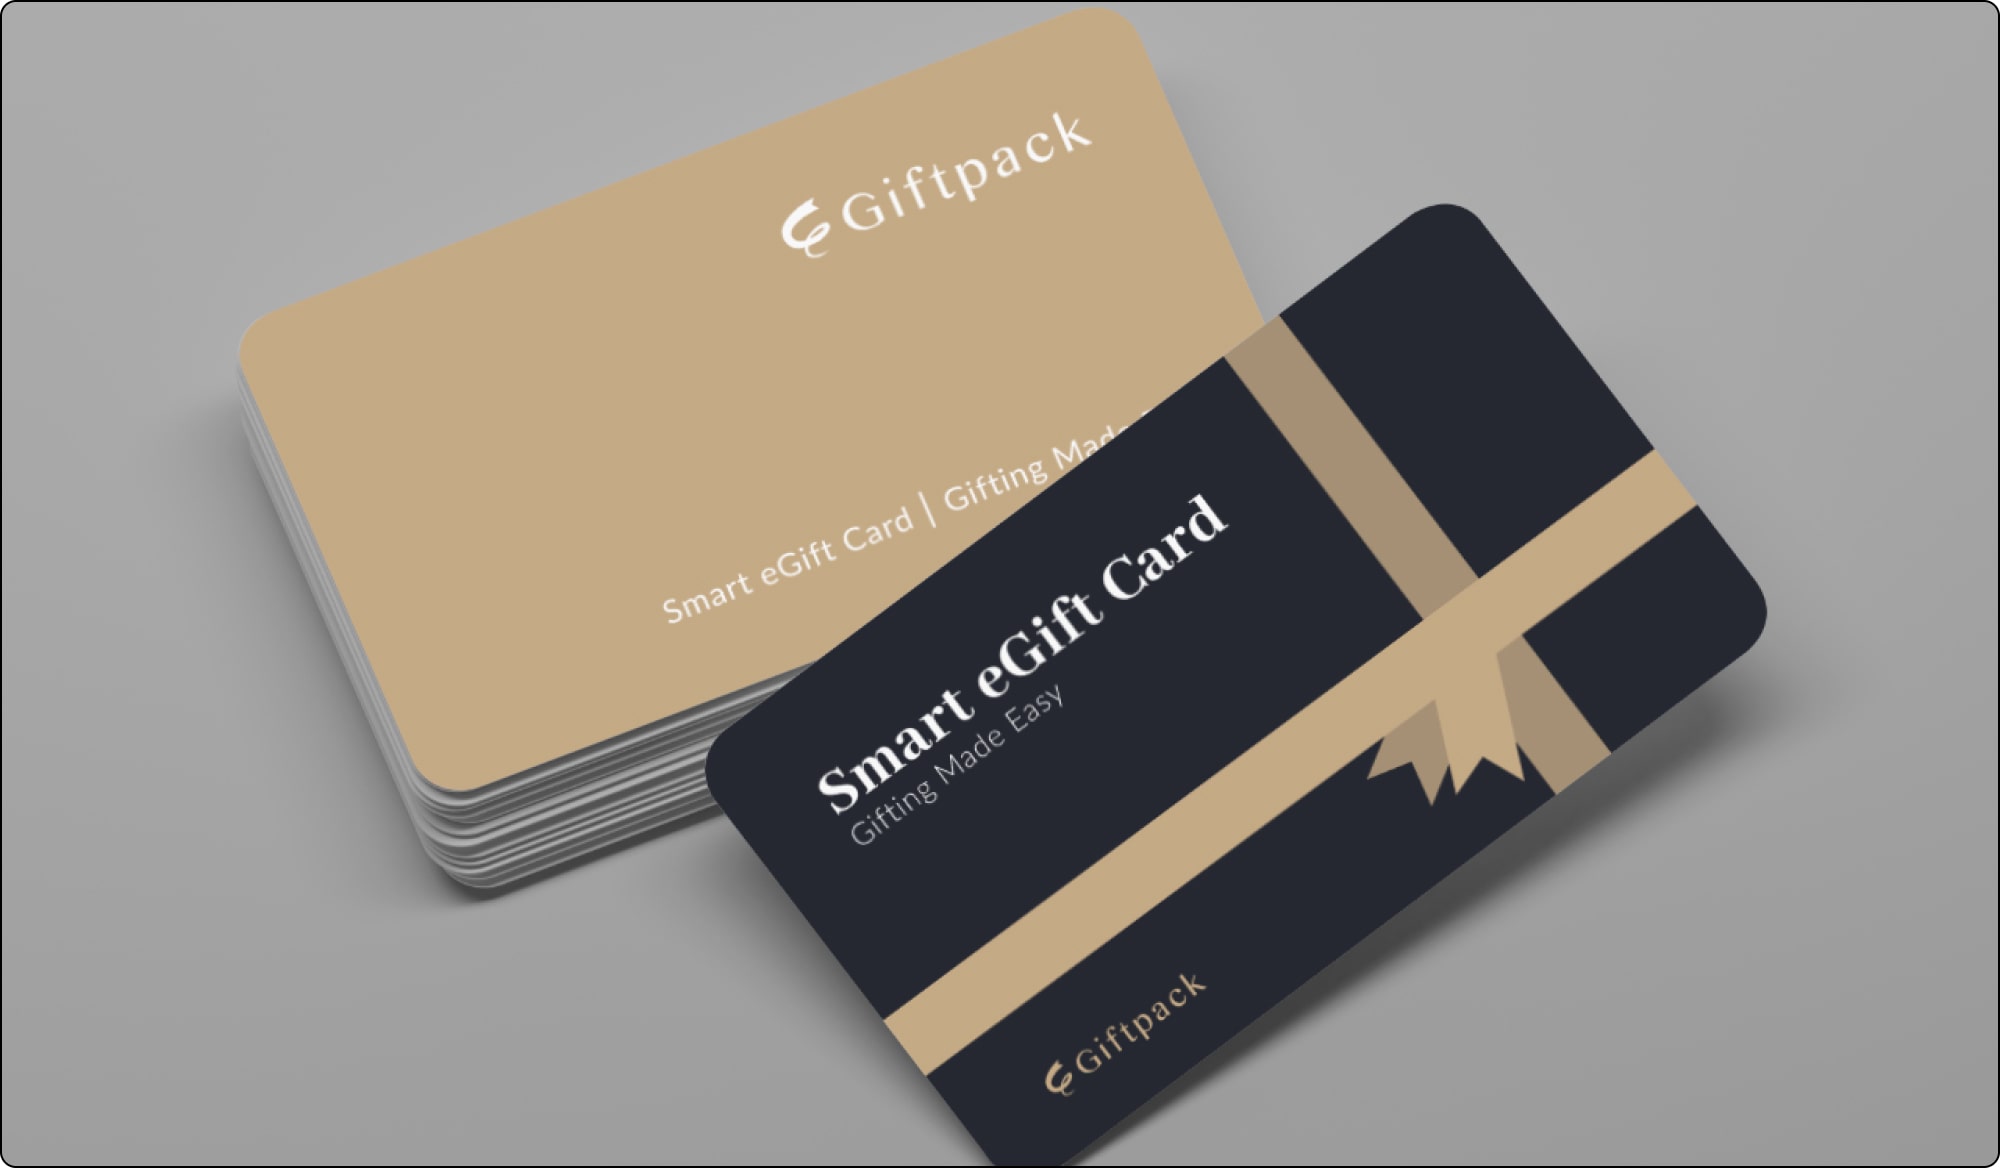 giftpack smart egift card for 350 brands for gifts for staff appreciation